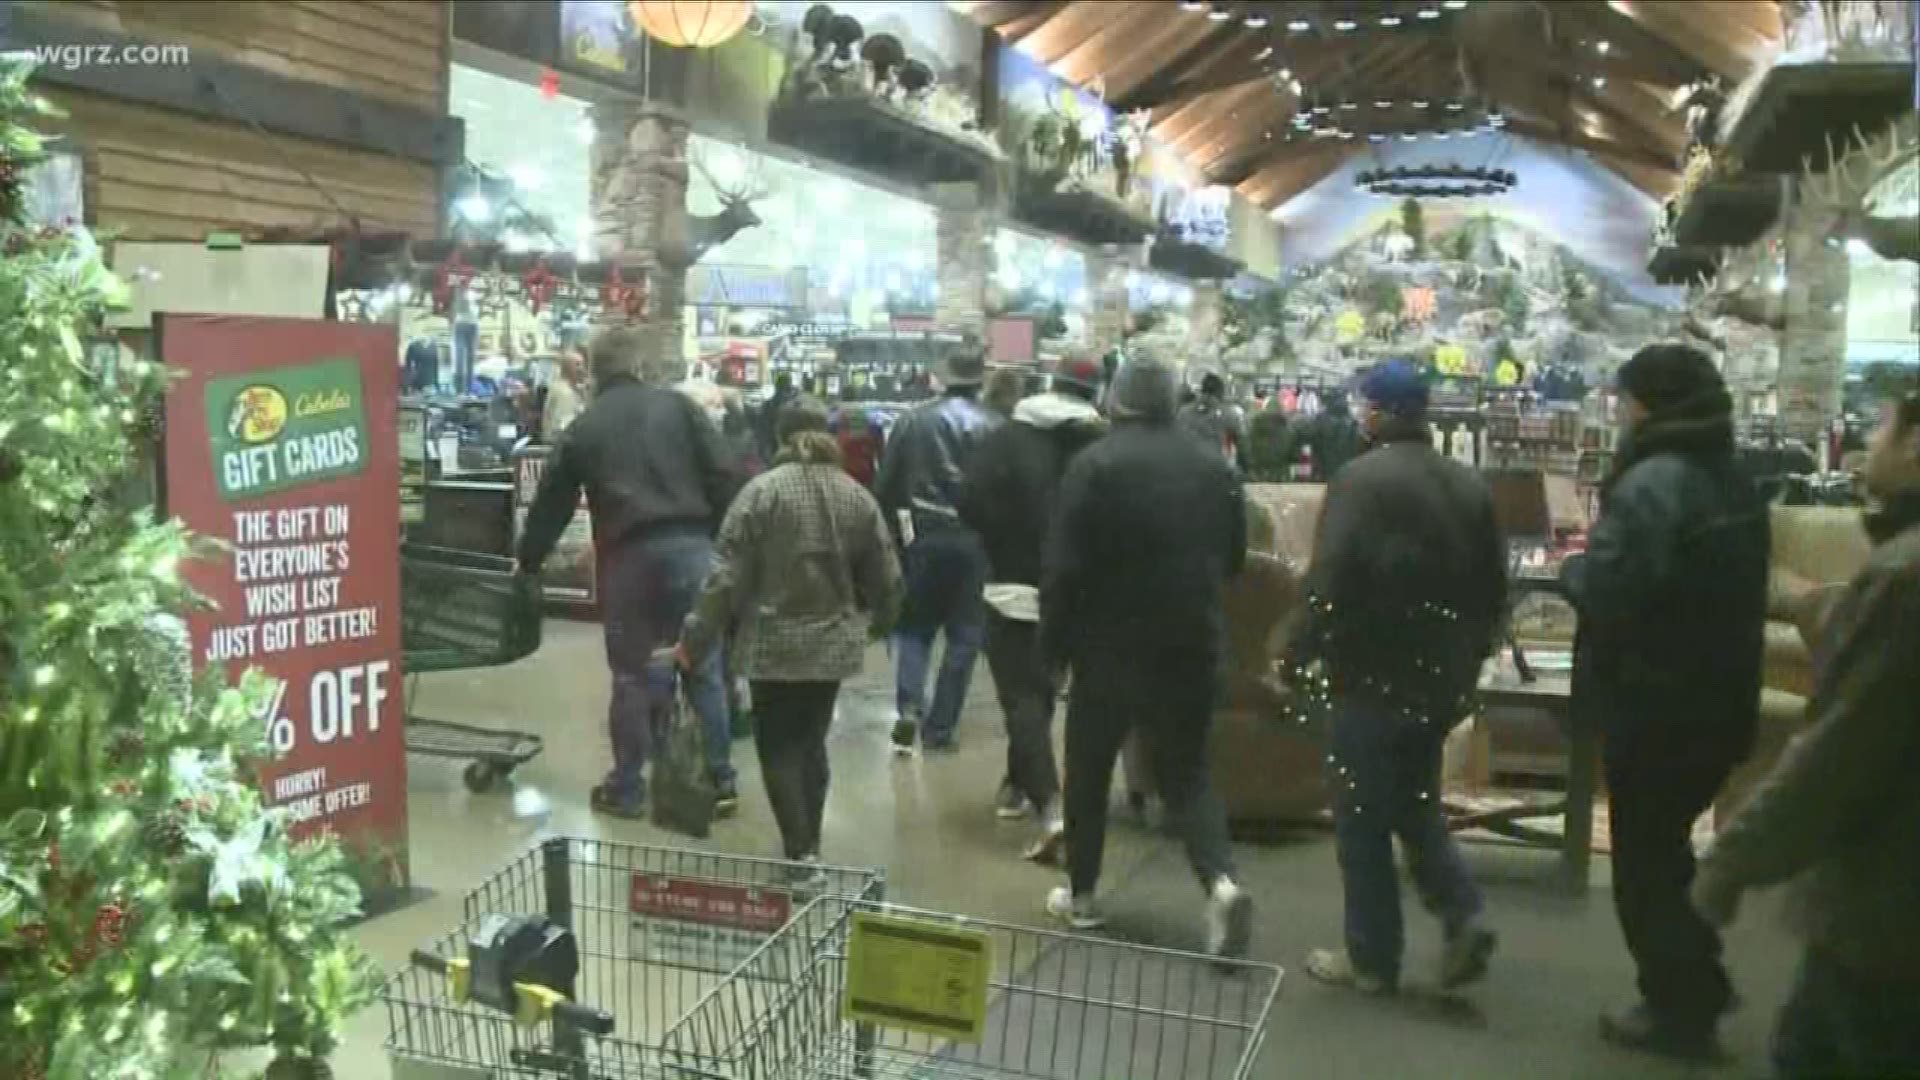 Black Friday may not be what it used to be, but Cabela's in Cheektowaga still knows how to draw a crowd for early morning deals